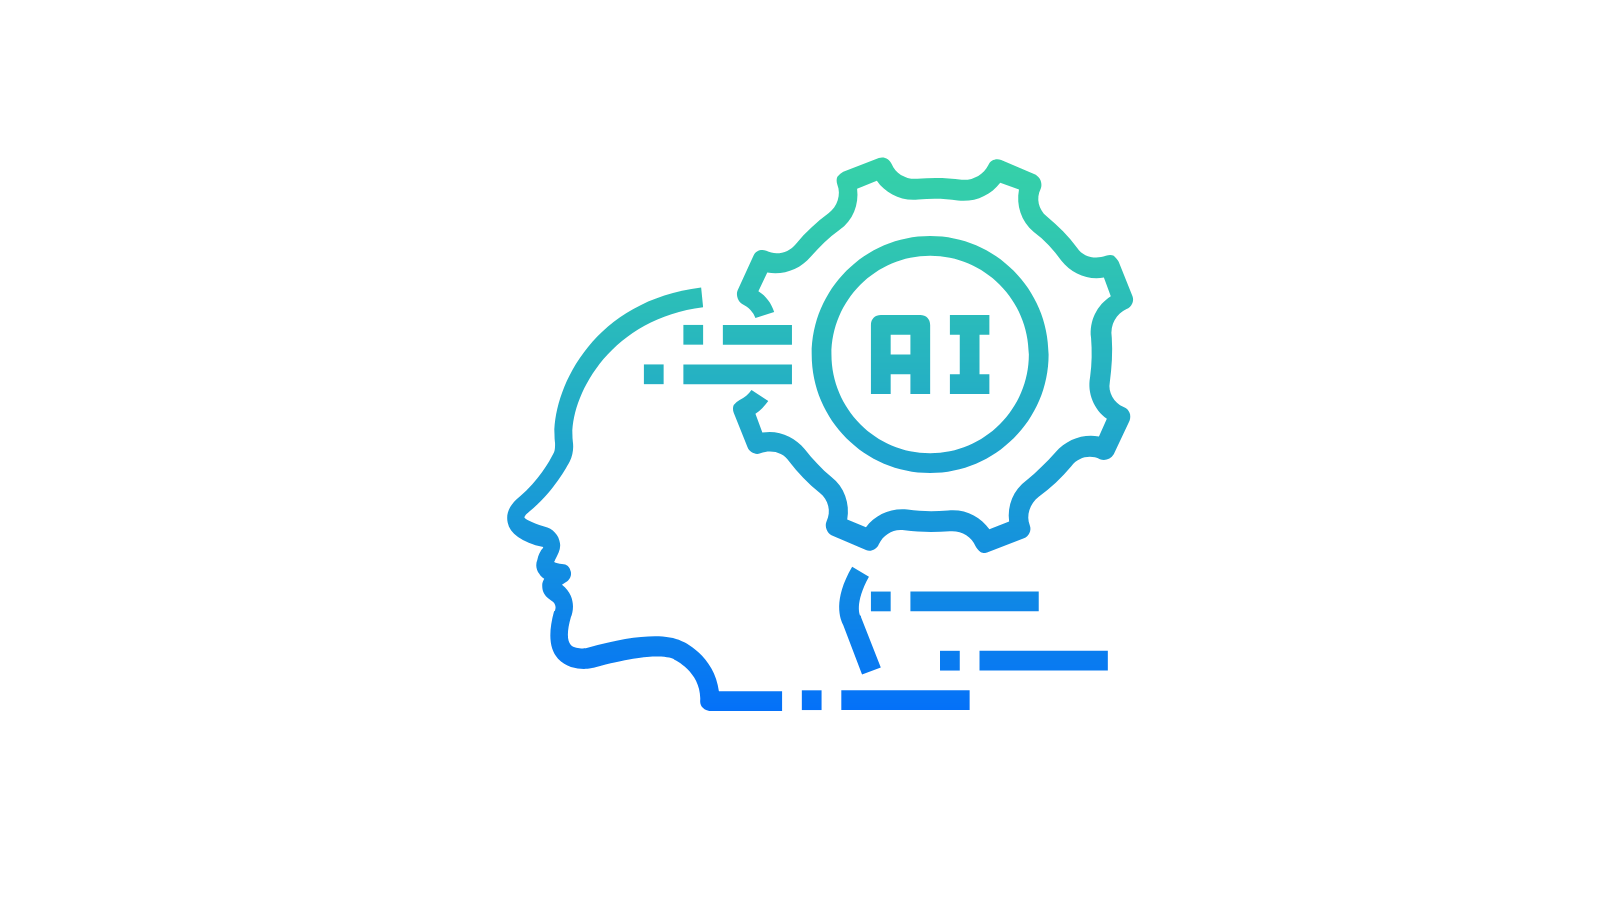 7 marzo, evento “Towards the Artificial Intelligence Act” – Brussels